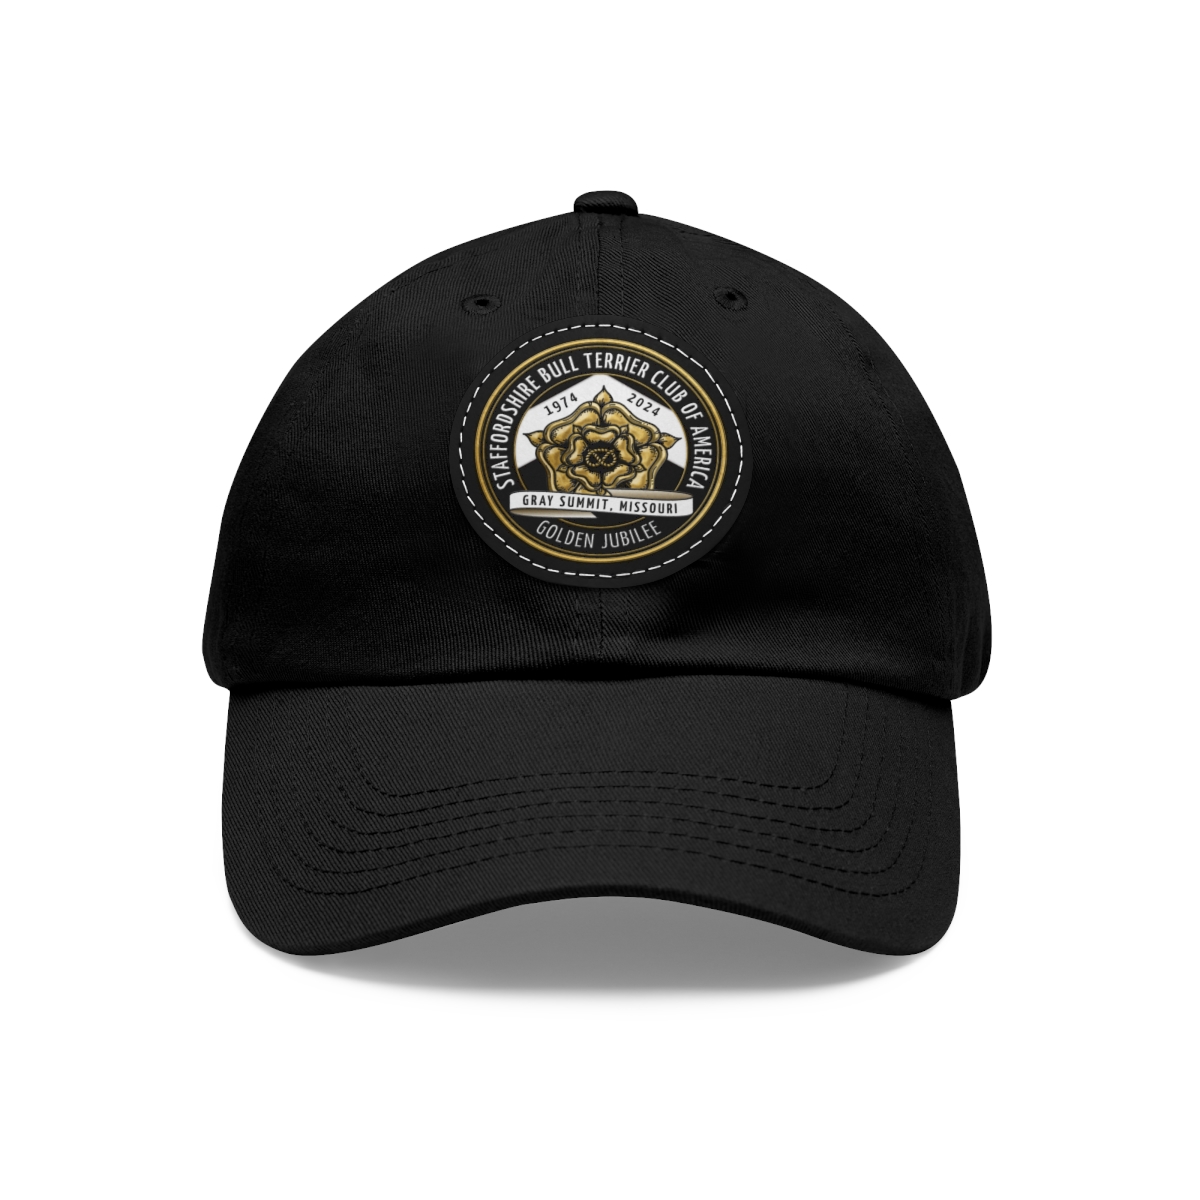 SBTCA Jubilee Hat with Leather Patch